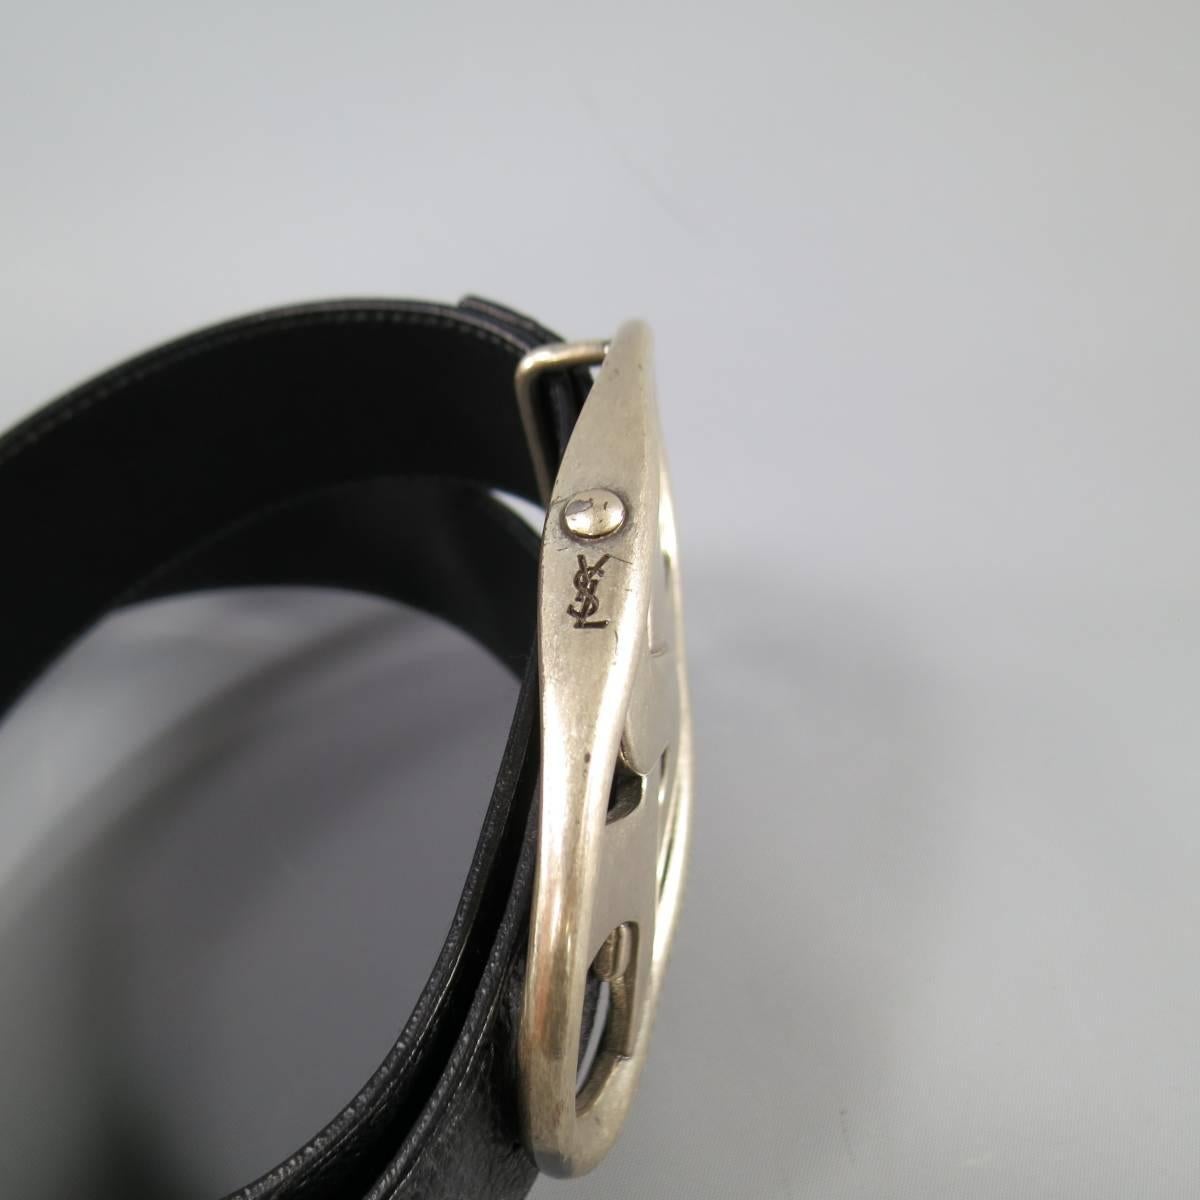 This classic YVES SAINT LAURENT belt comes in black pebbled leather and features adjustable button stud closure and an oversized, silver tone, retro YSL logo oval buckle. Made in Italy.
 
Very Good Pre-Owned Condition.
Marked: 34
